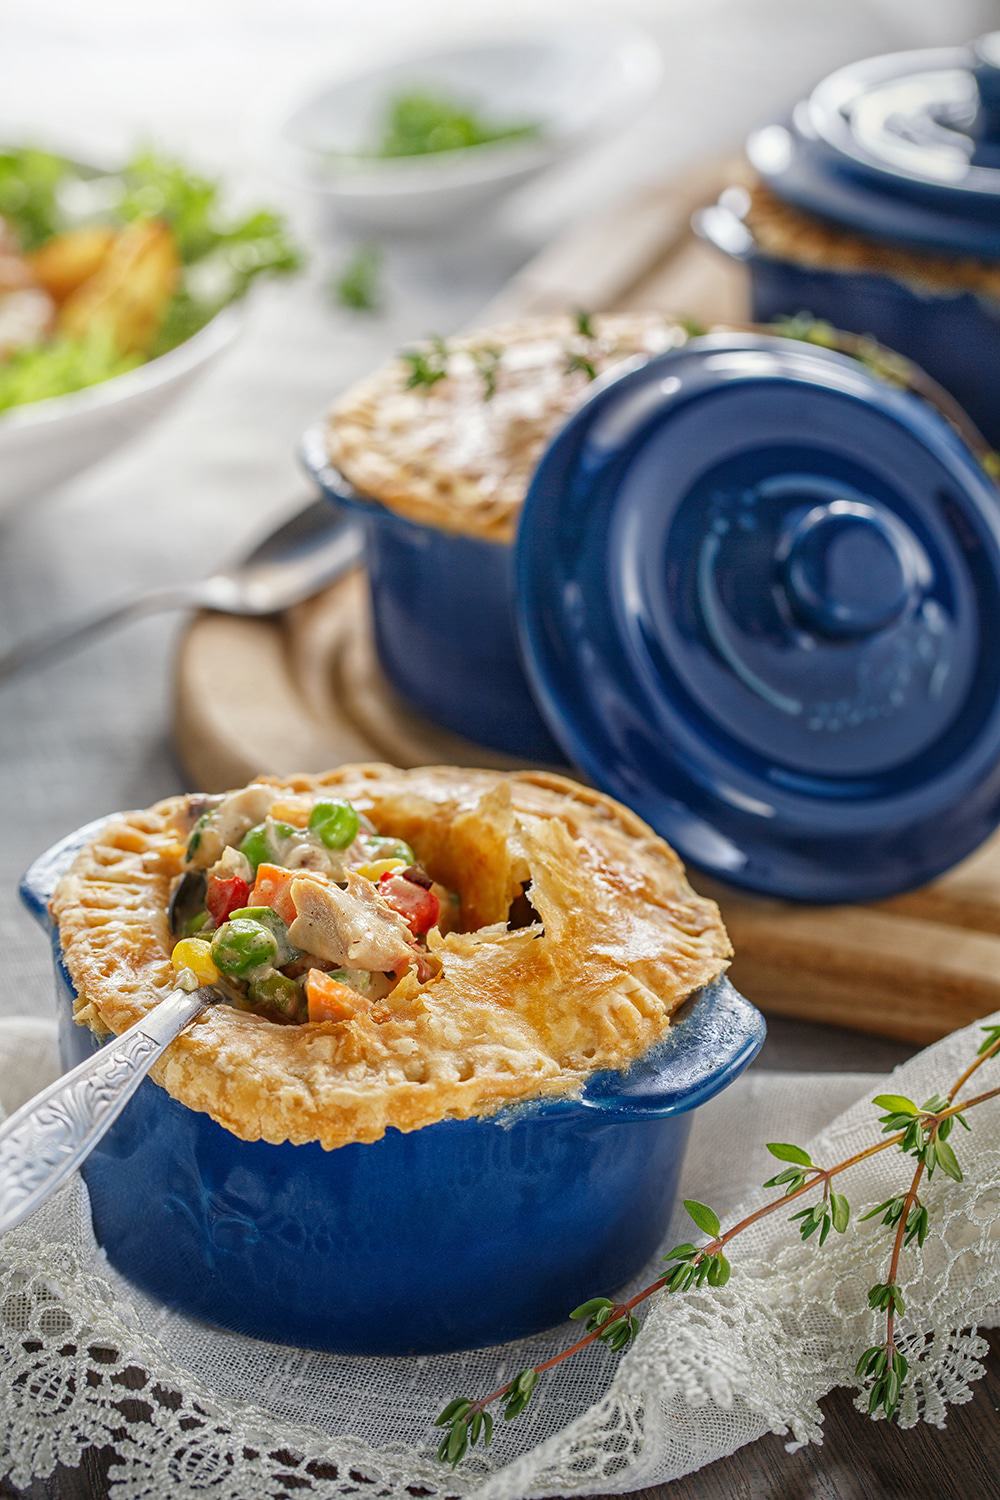 The Comfort And Joy Of Chicken Pot Pies | Cooking Clue | The Eater's Manifesto